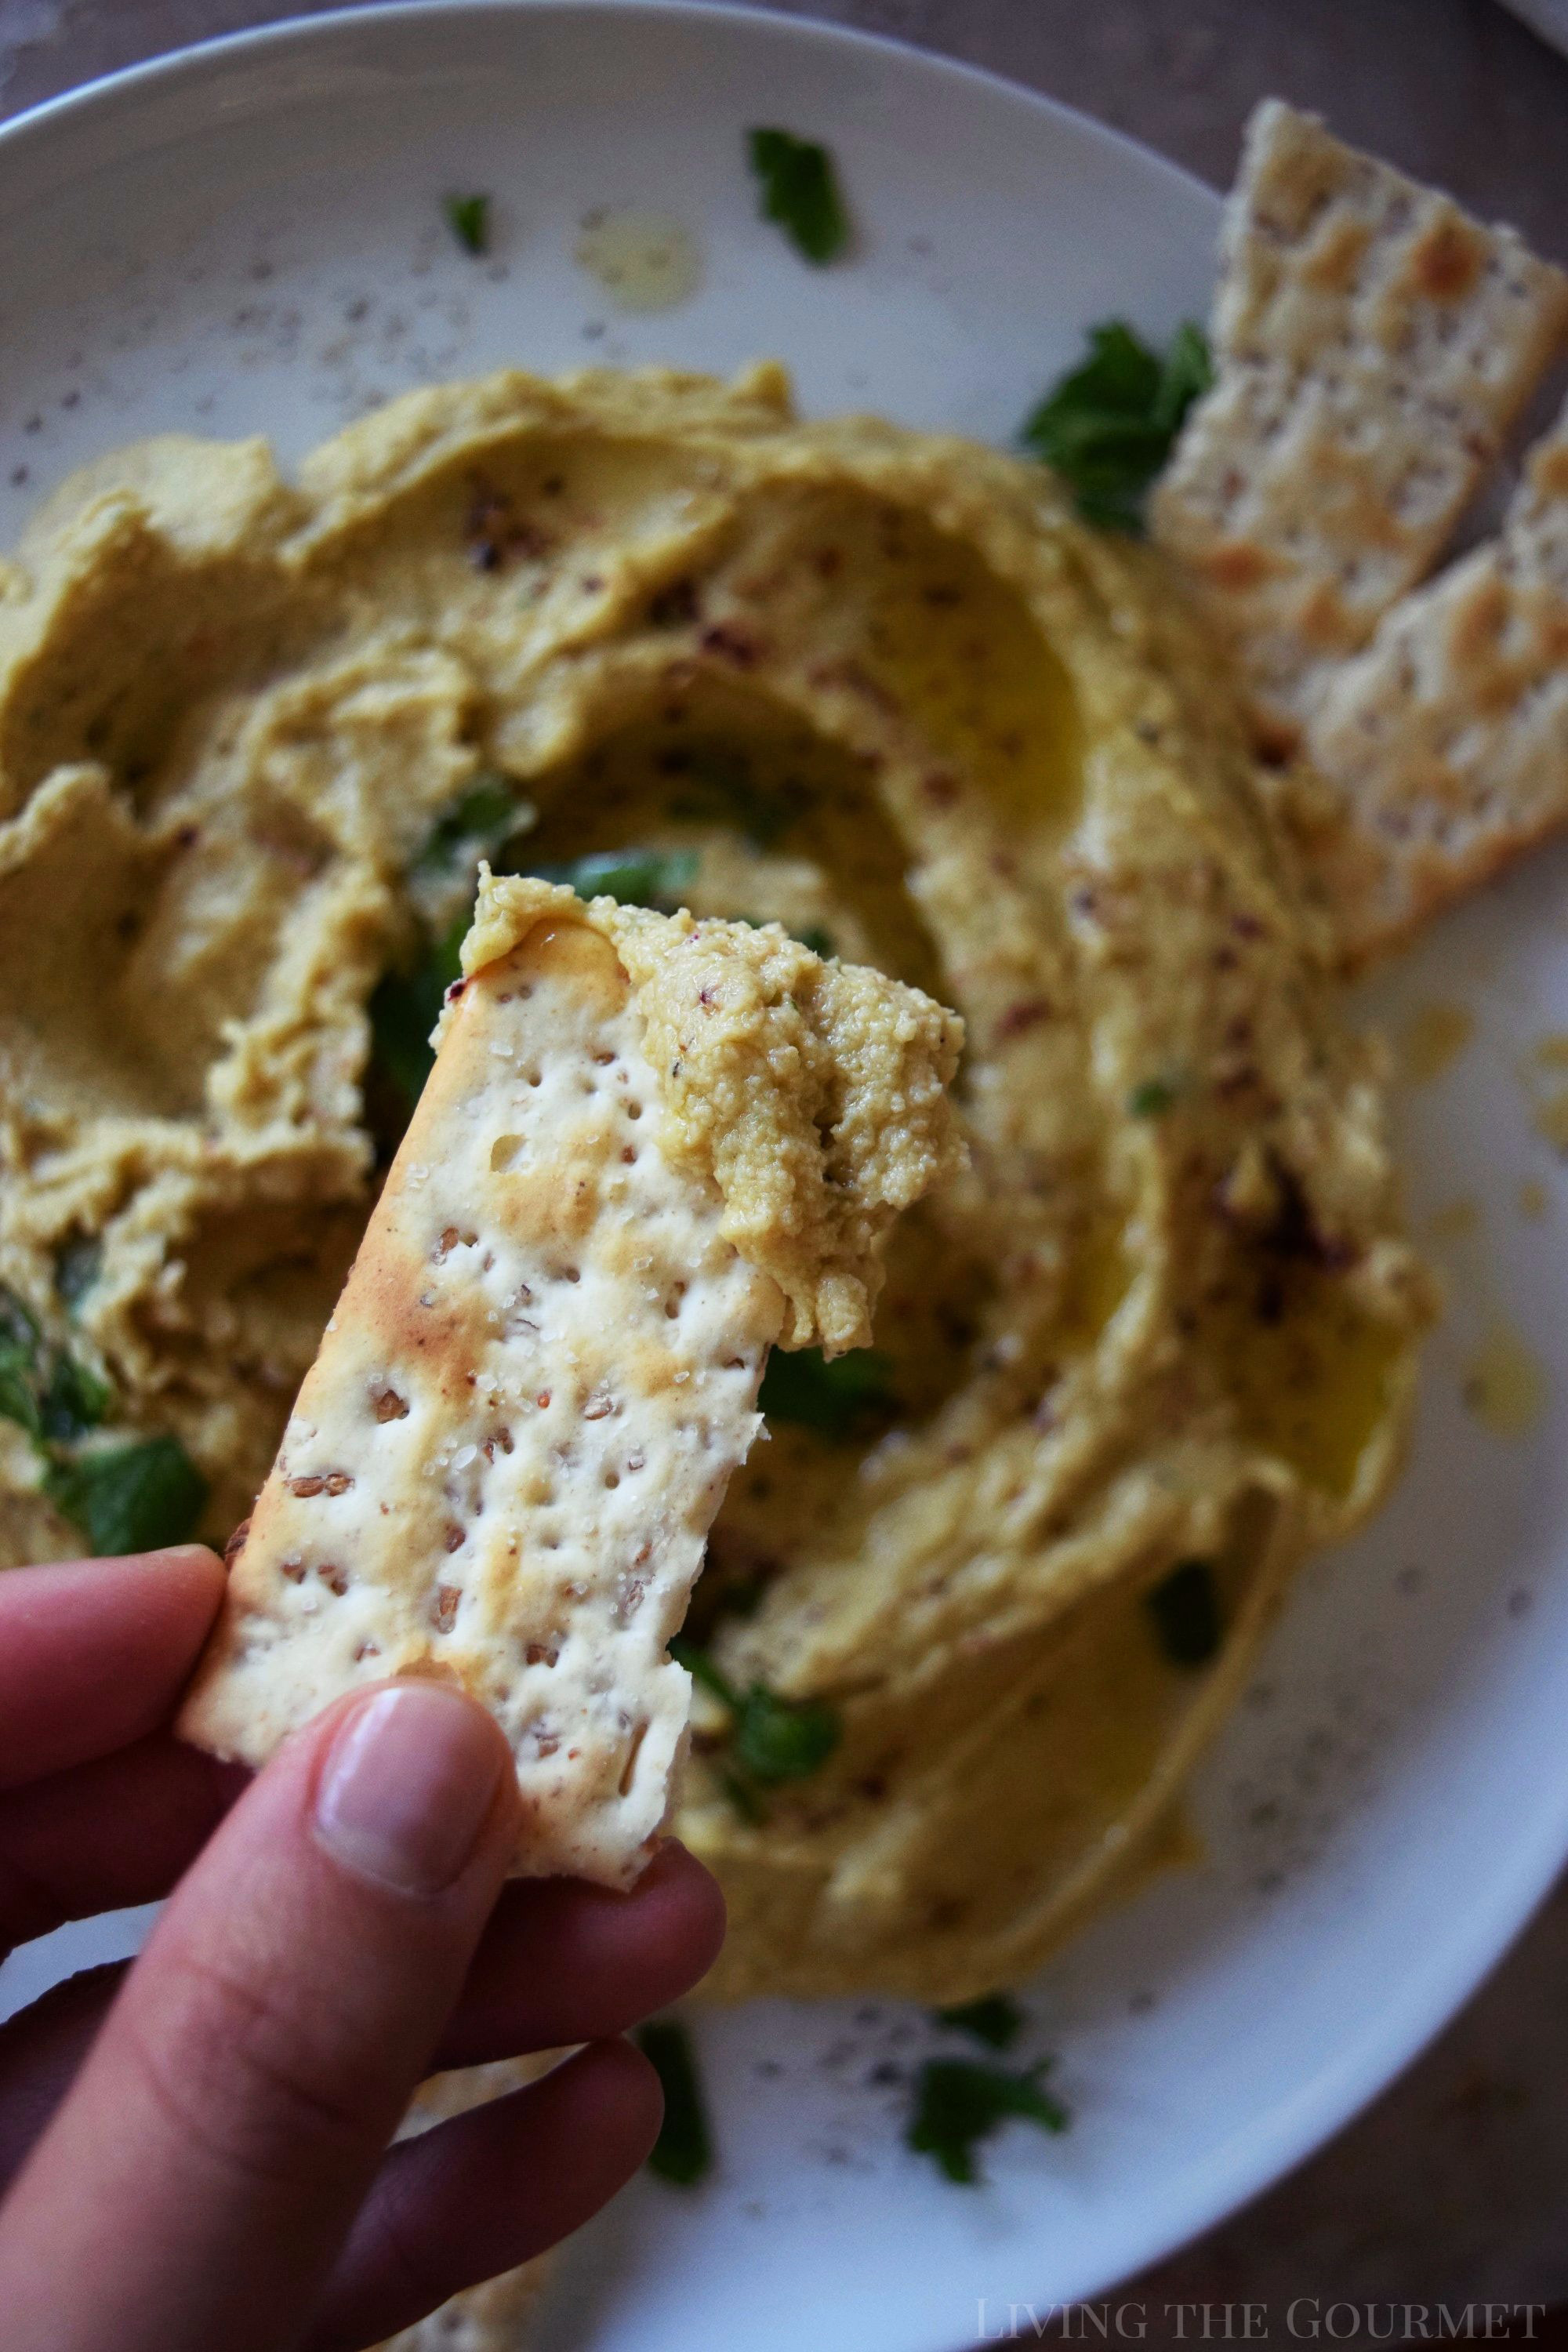 Living the Gourmet: Hummus is one of the healthiest and easiest recipes you can make. This Spicy Hummus is only a handful of ingredients away!